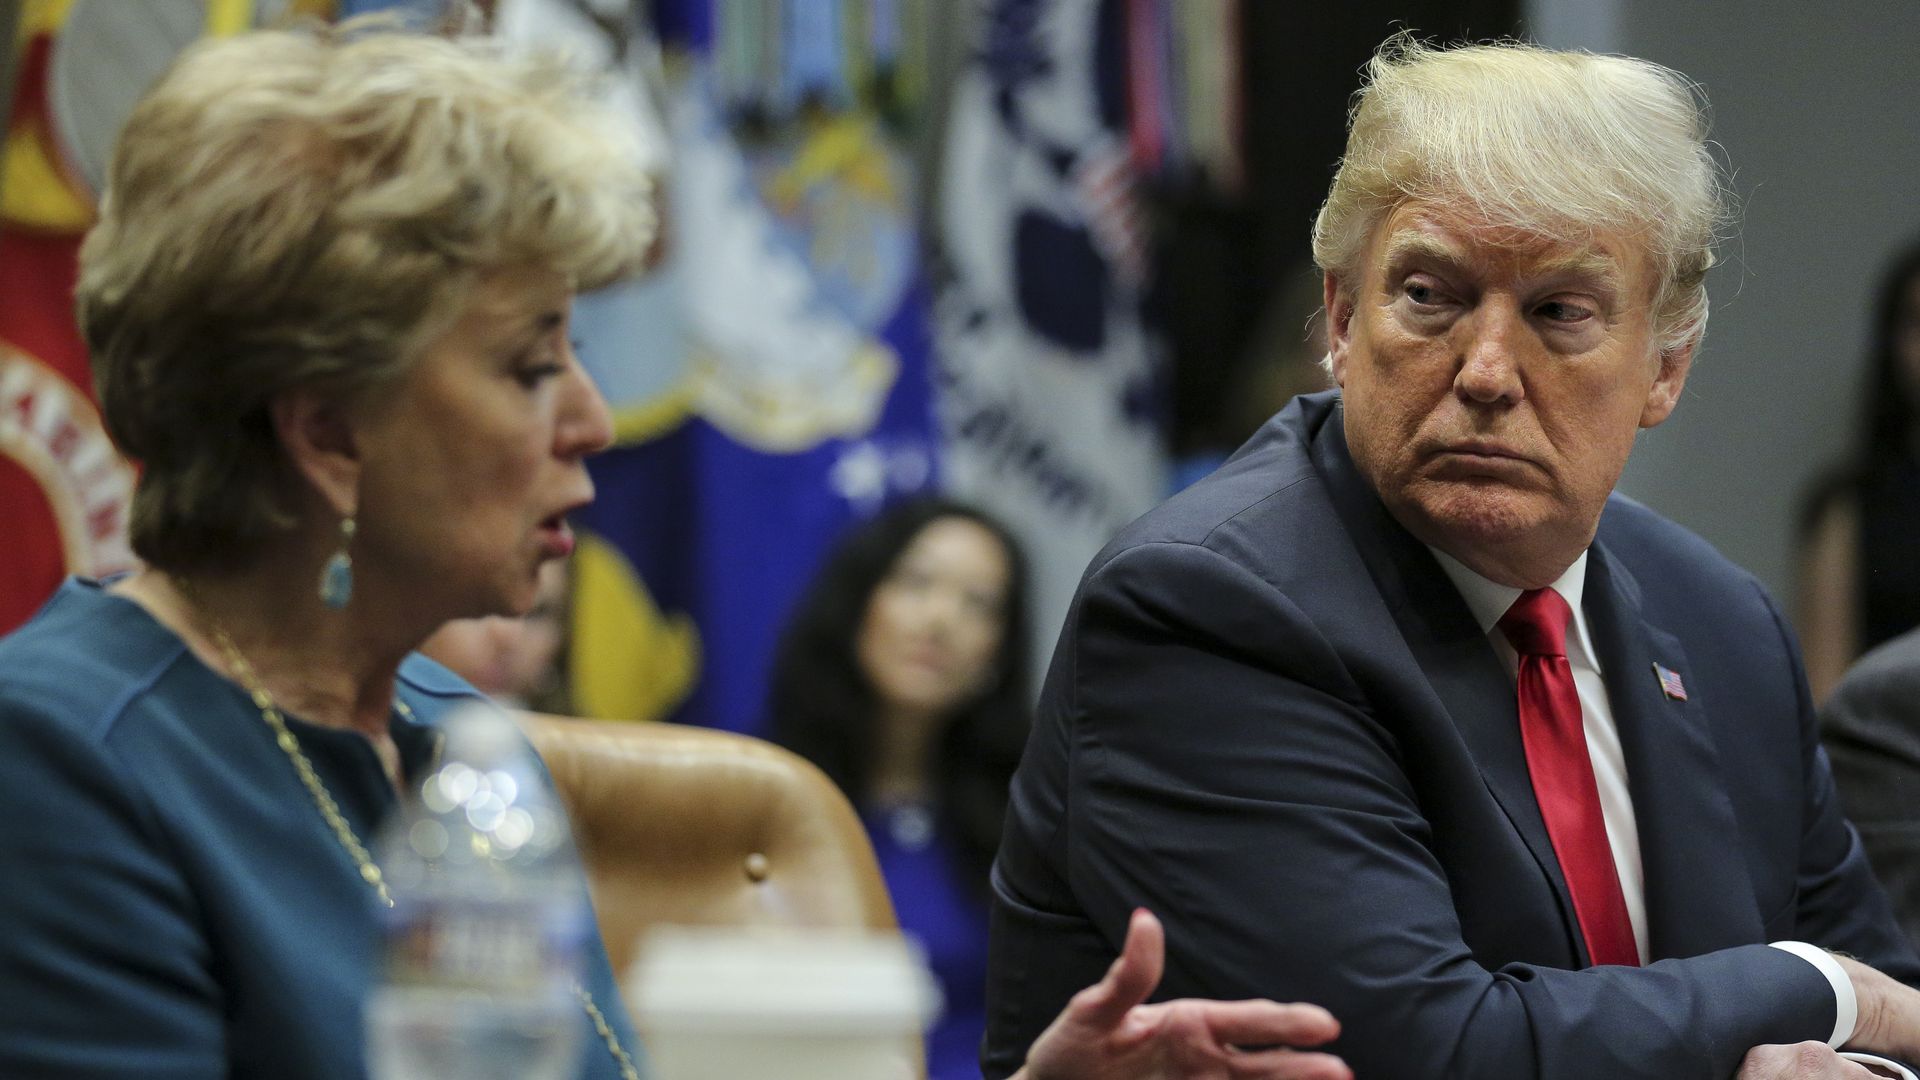 In this image, Linda McMahon talks at a meeting and Trump sits next to her, listening. 